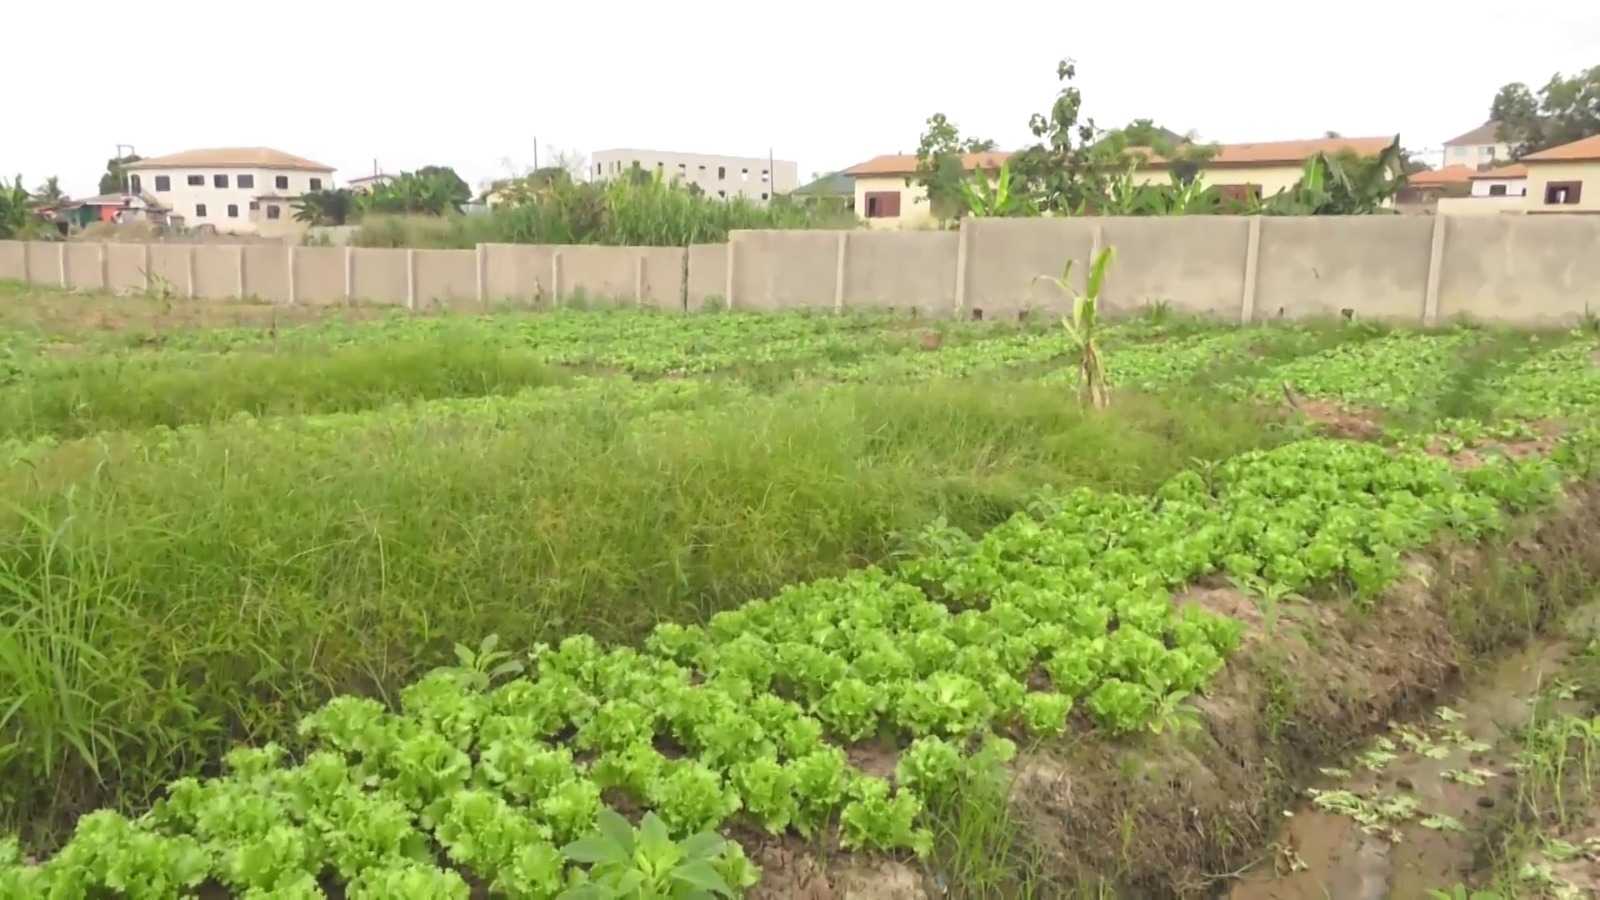 Farmers bemoan impact of sale of farmlands for real estate development on food production